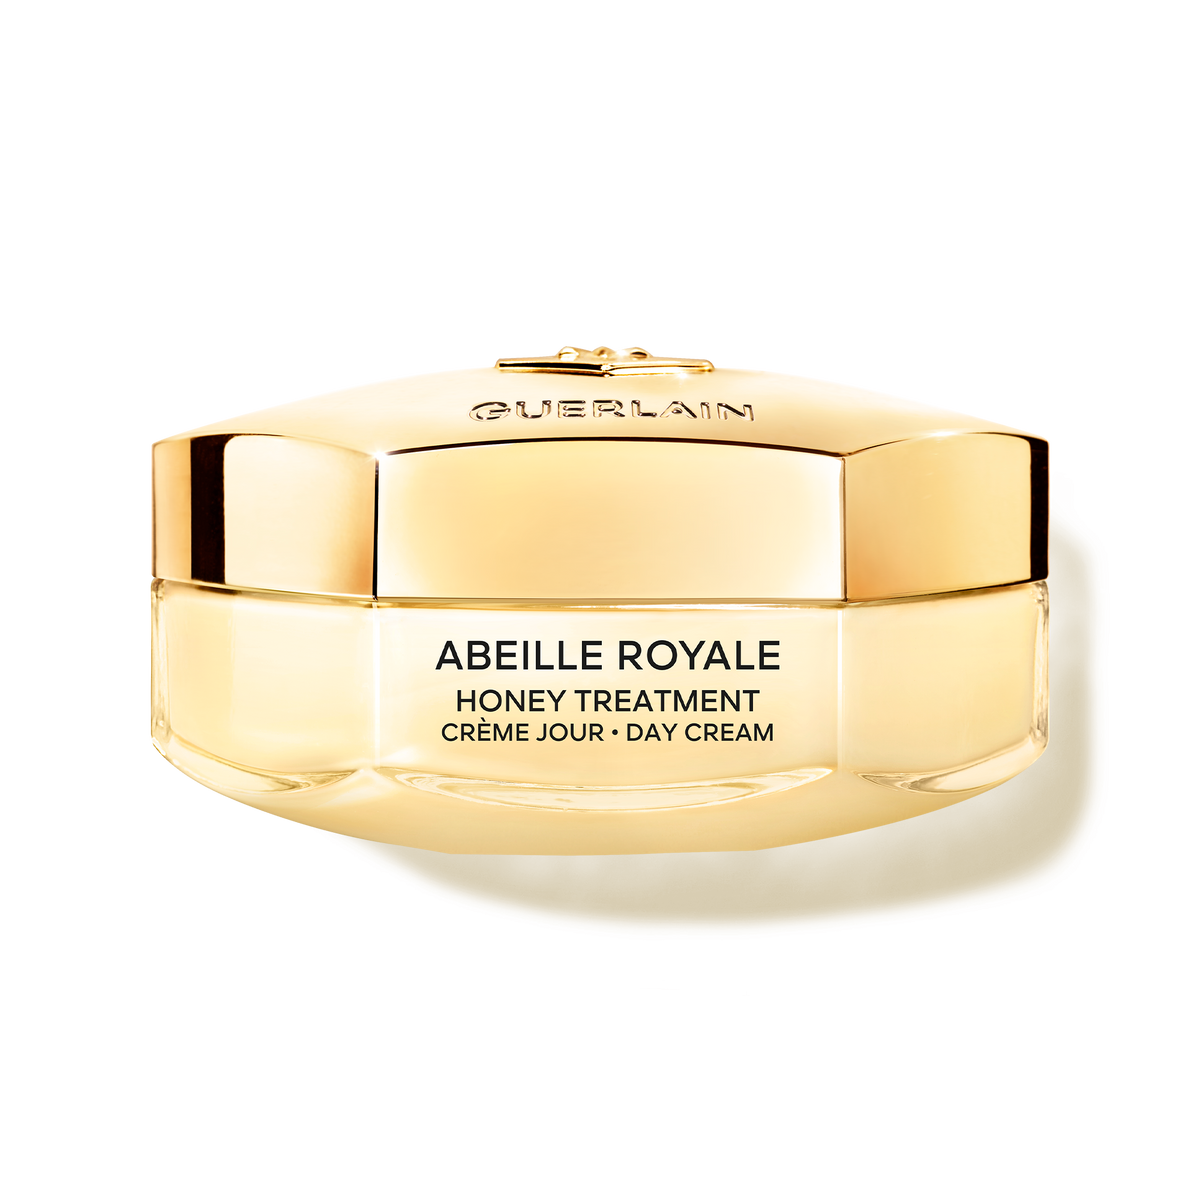 ABEILLE_ROYALE_DAY_CREAM_50ml (1).png__PID:e45a03ef-be96-48aa-8f90-0df092afbce6